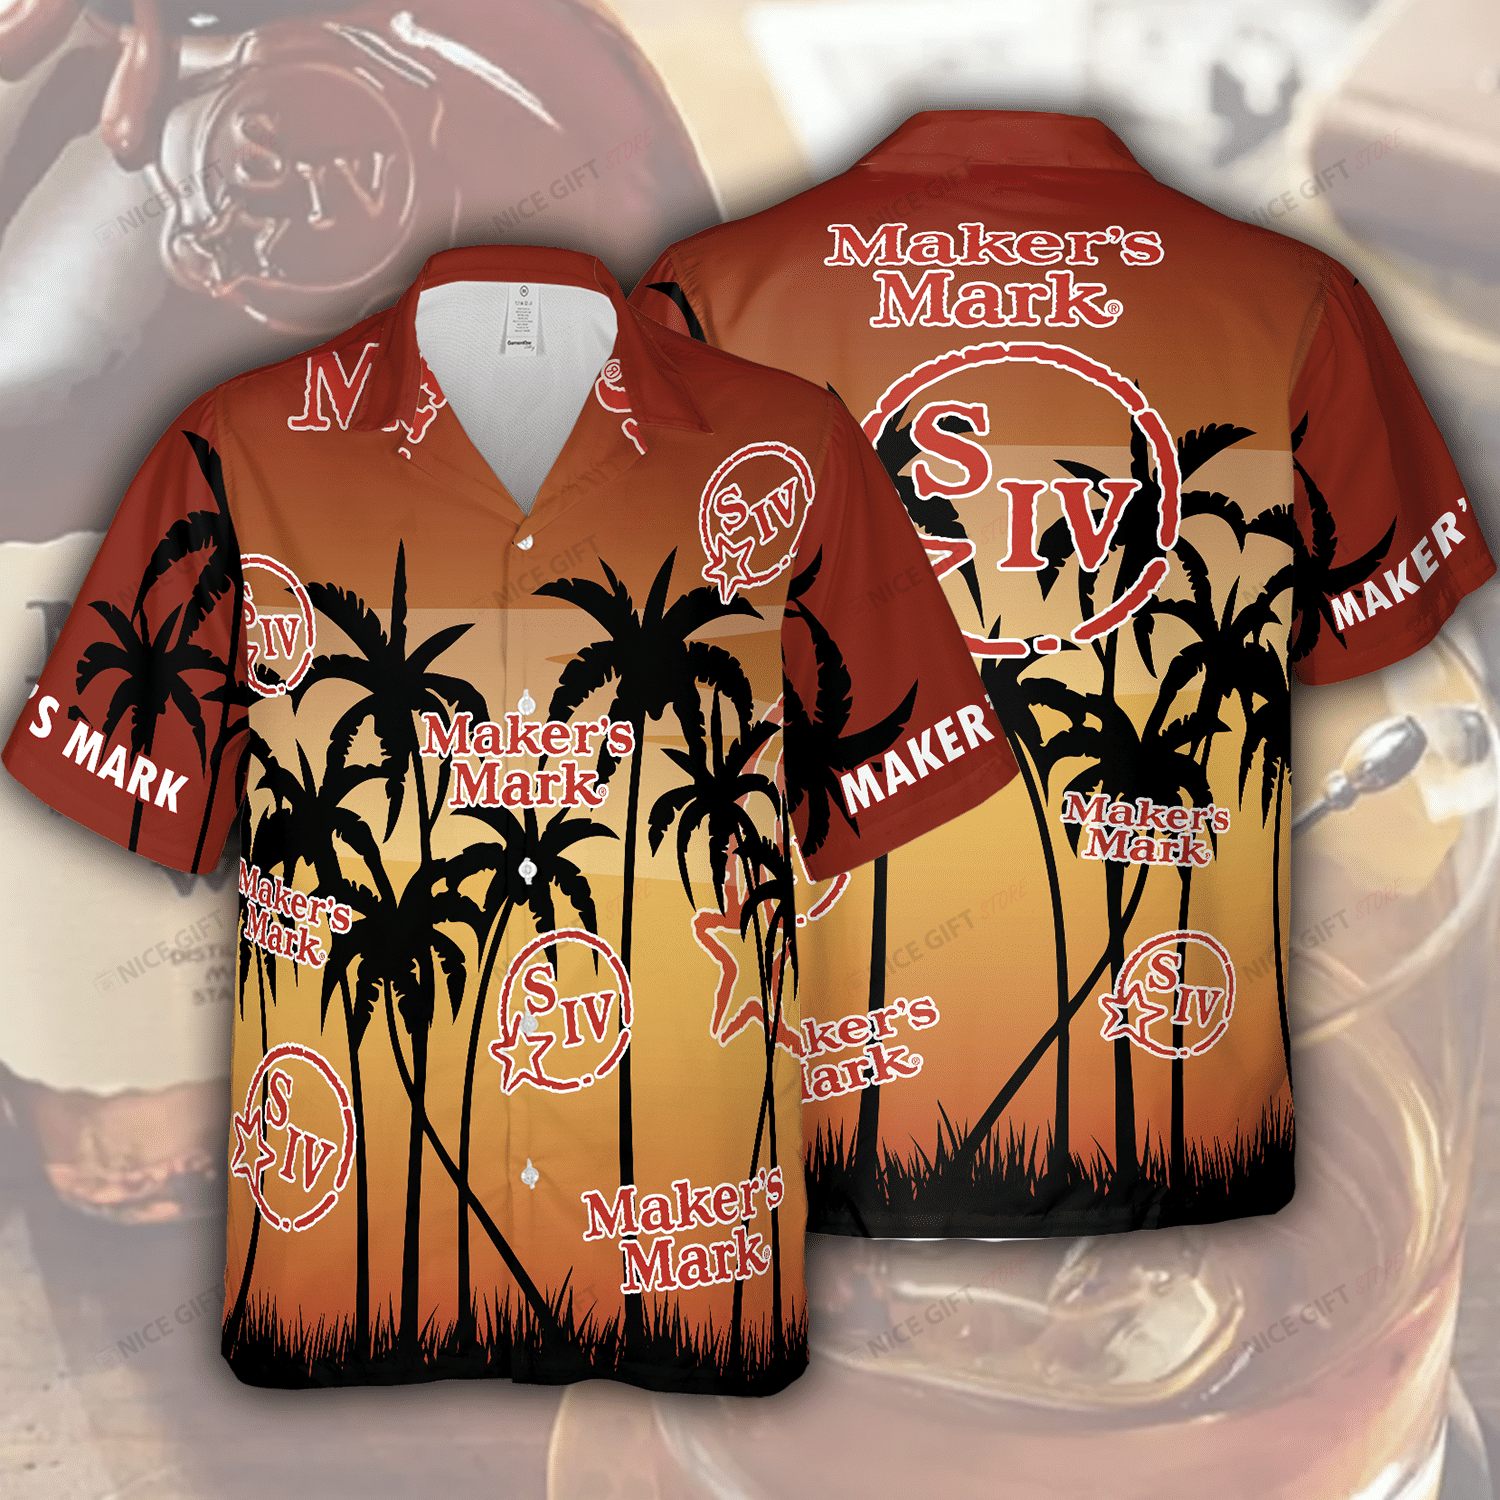 If you're a fan of a Hawaiian Shirt, you can choose one at our store 83